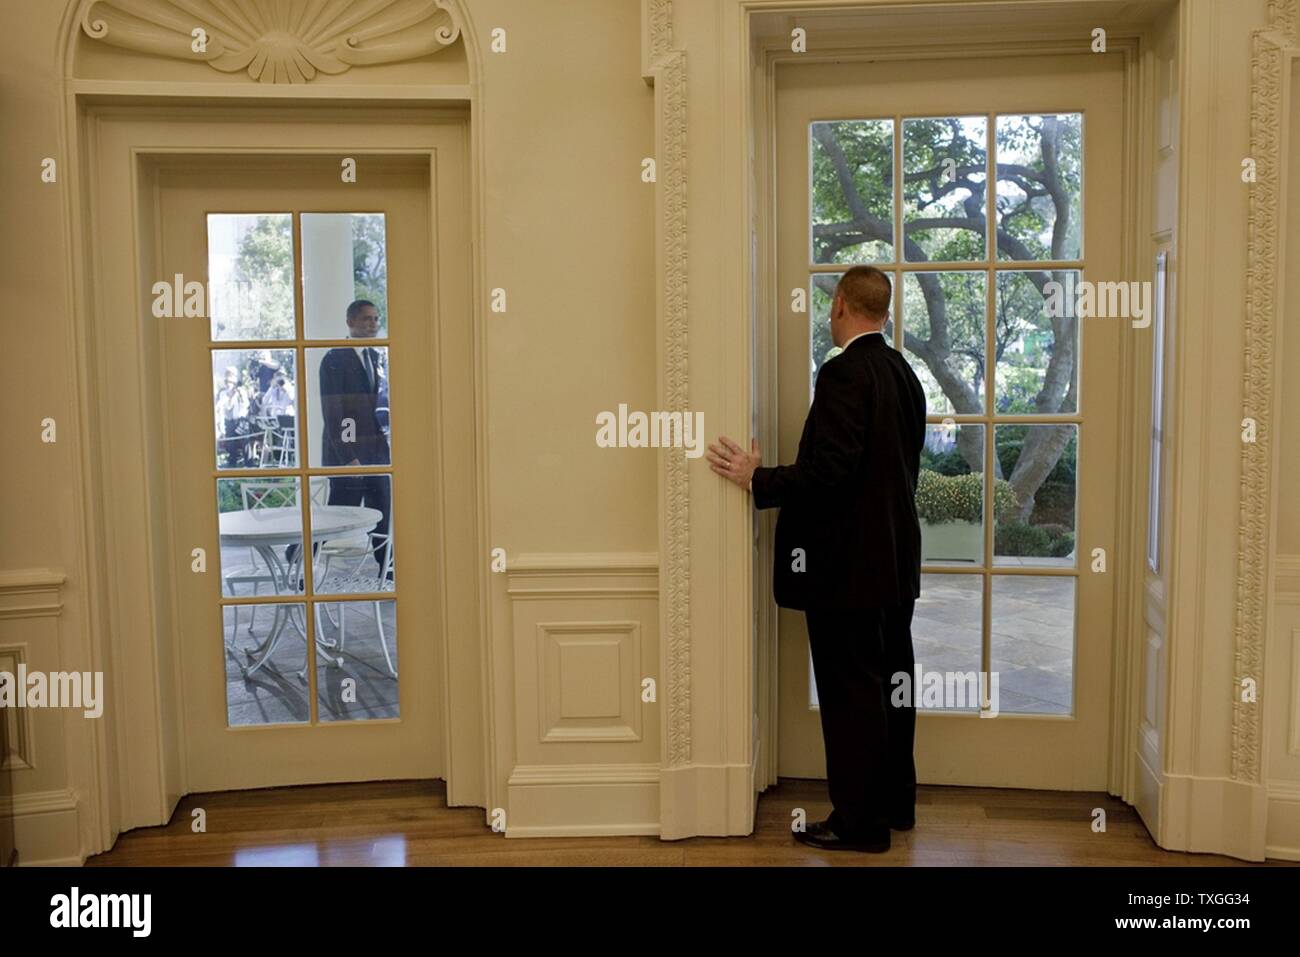 Secret Service Agent in Oval Office ready to open the door for approaching President Barack Obama. Stock Photo